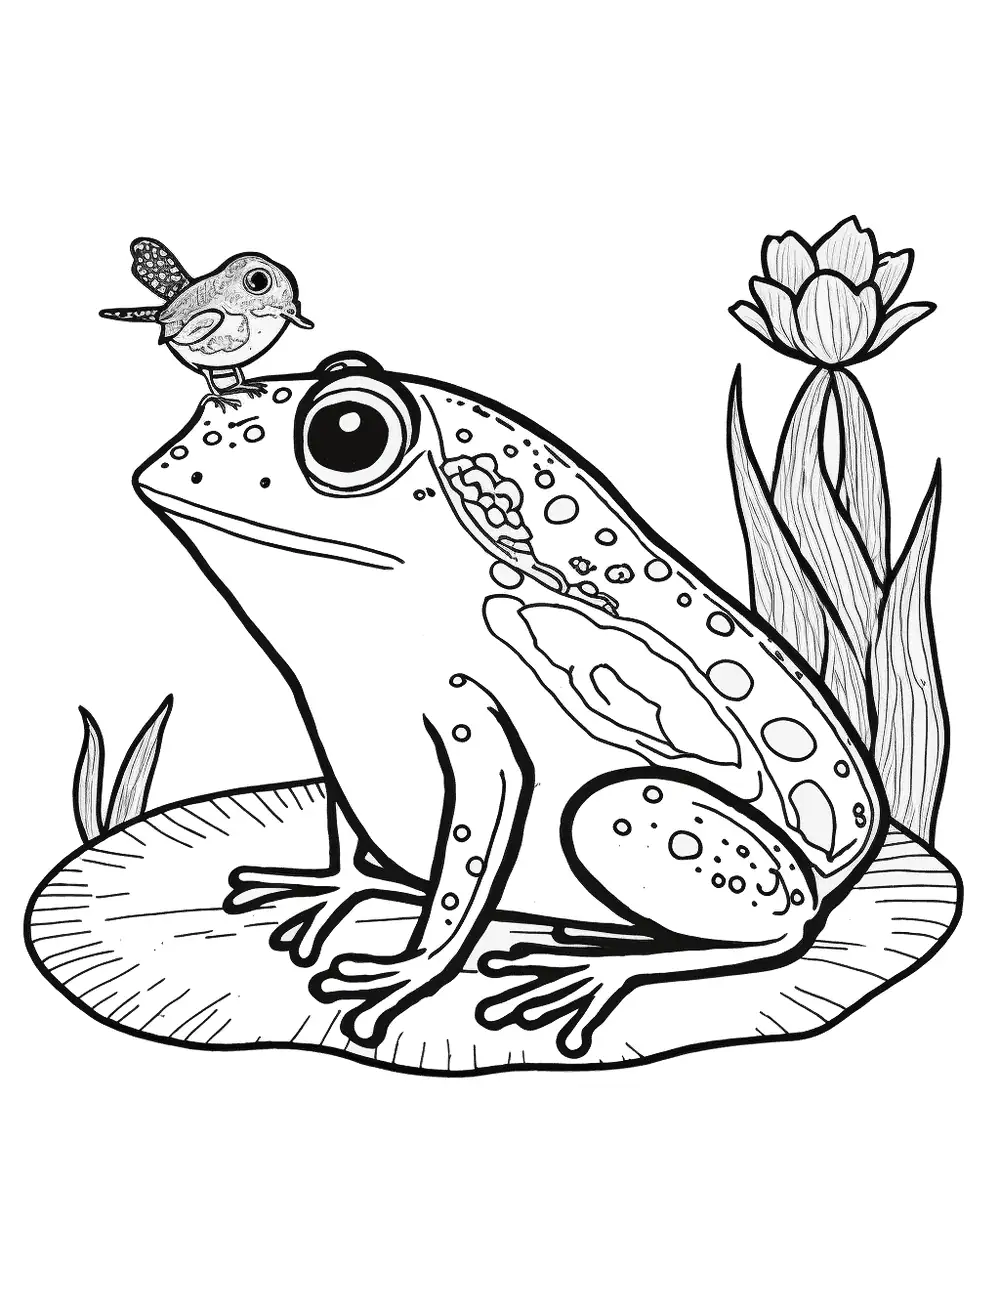 Frog and Bird Coloring Page - A frog and a bird, with the bird sitting on the frog’s back.